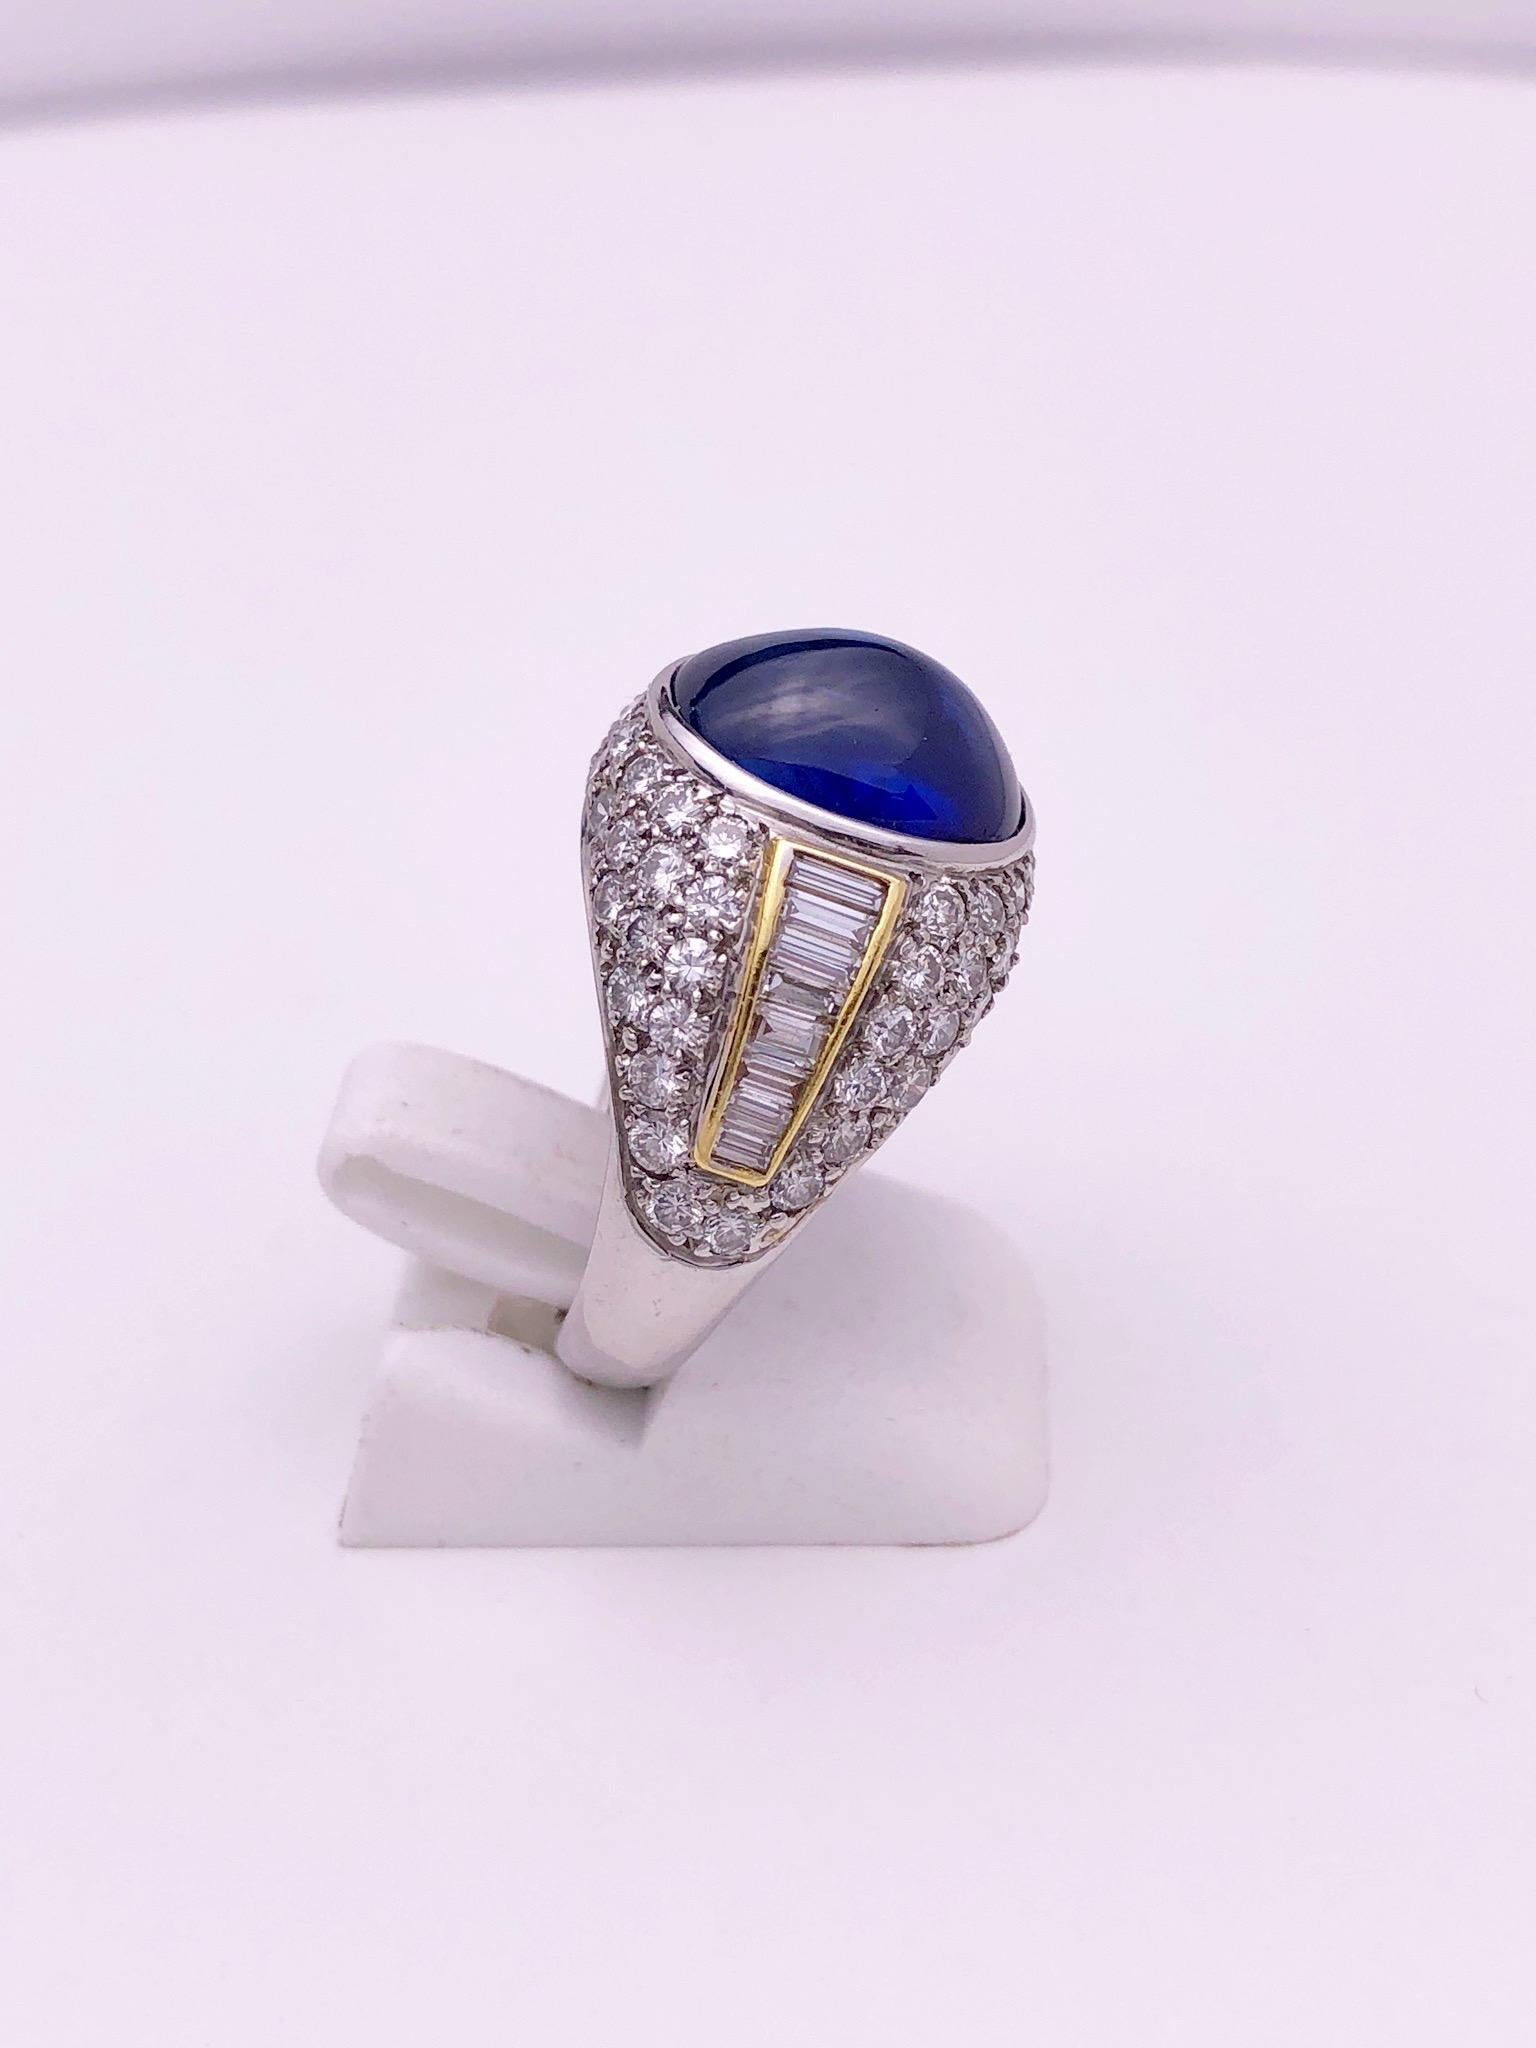 Oval Cut Platinum and 18KT Dome Ring with 6.85Ct. Cabochon Sapphire, and 2.78Ct. Diamonds For Sale